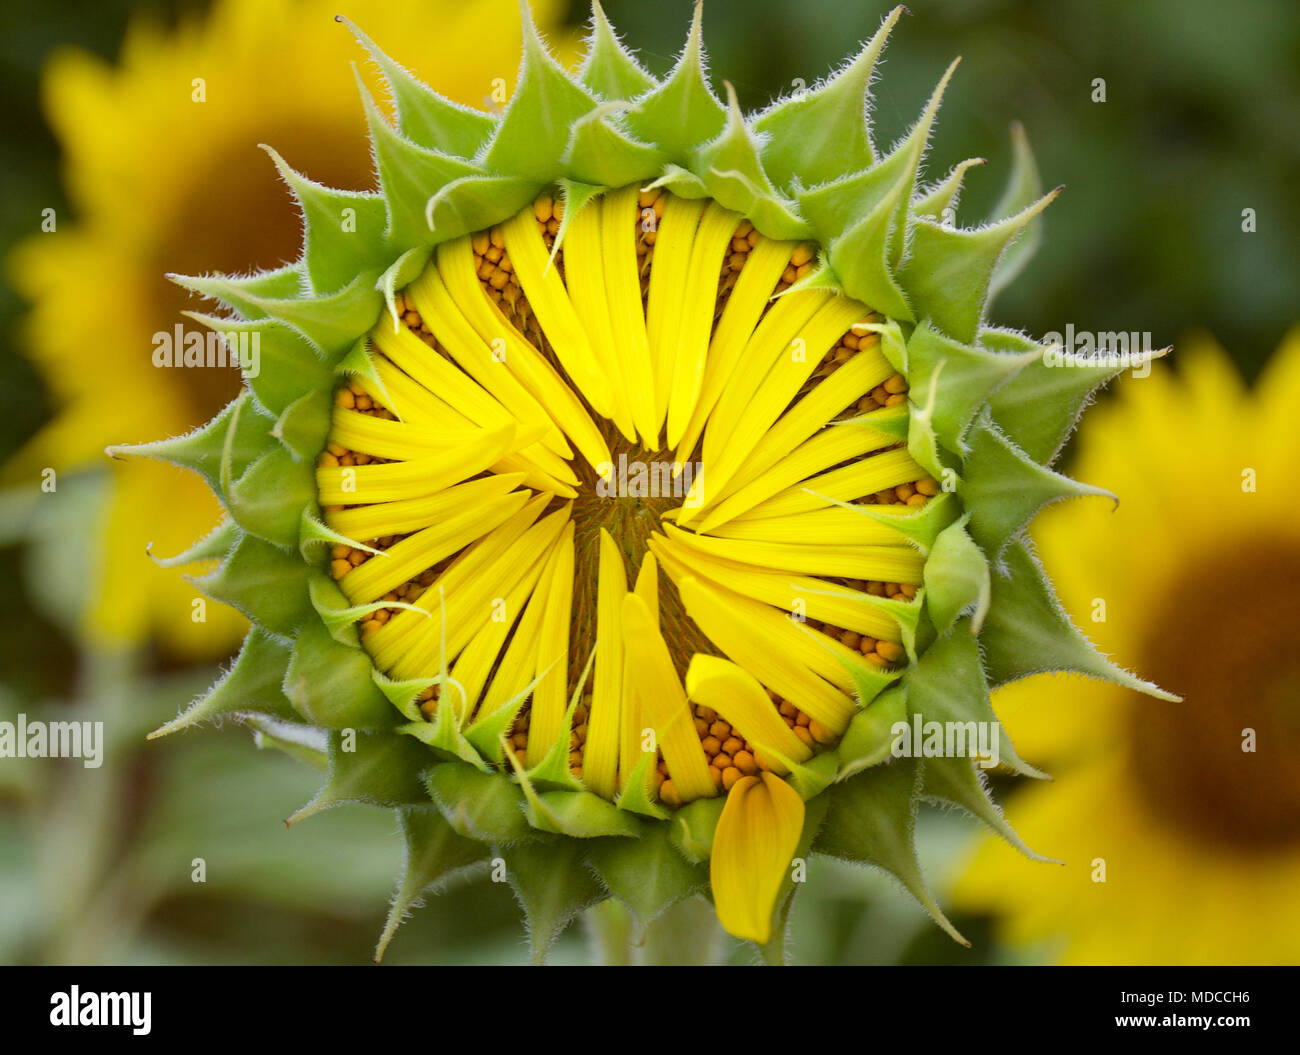 Sunflower heads budding into bloom with yellow petals about to open Stock Photo